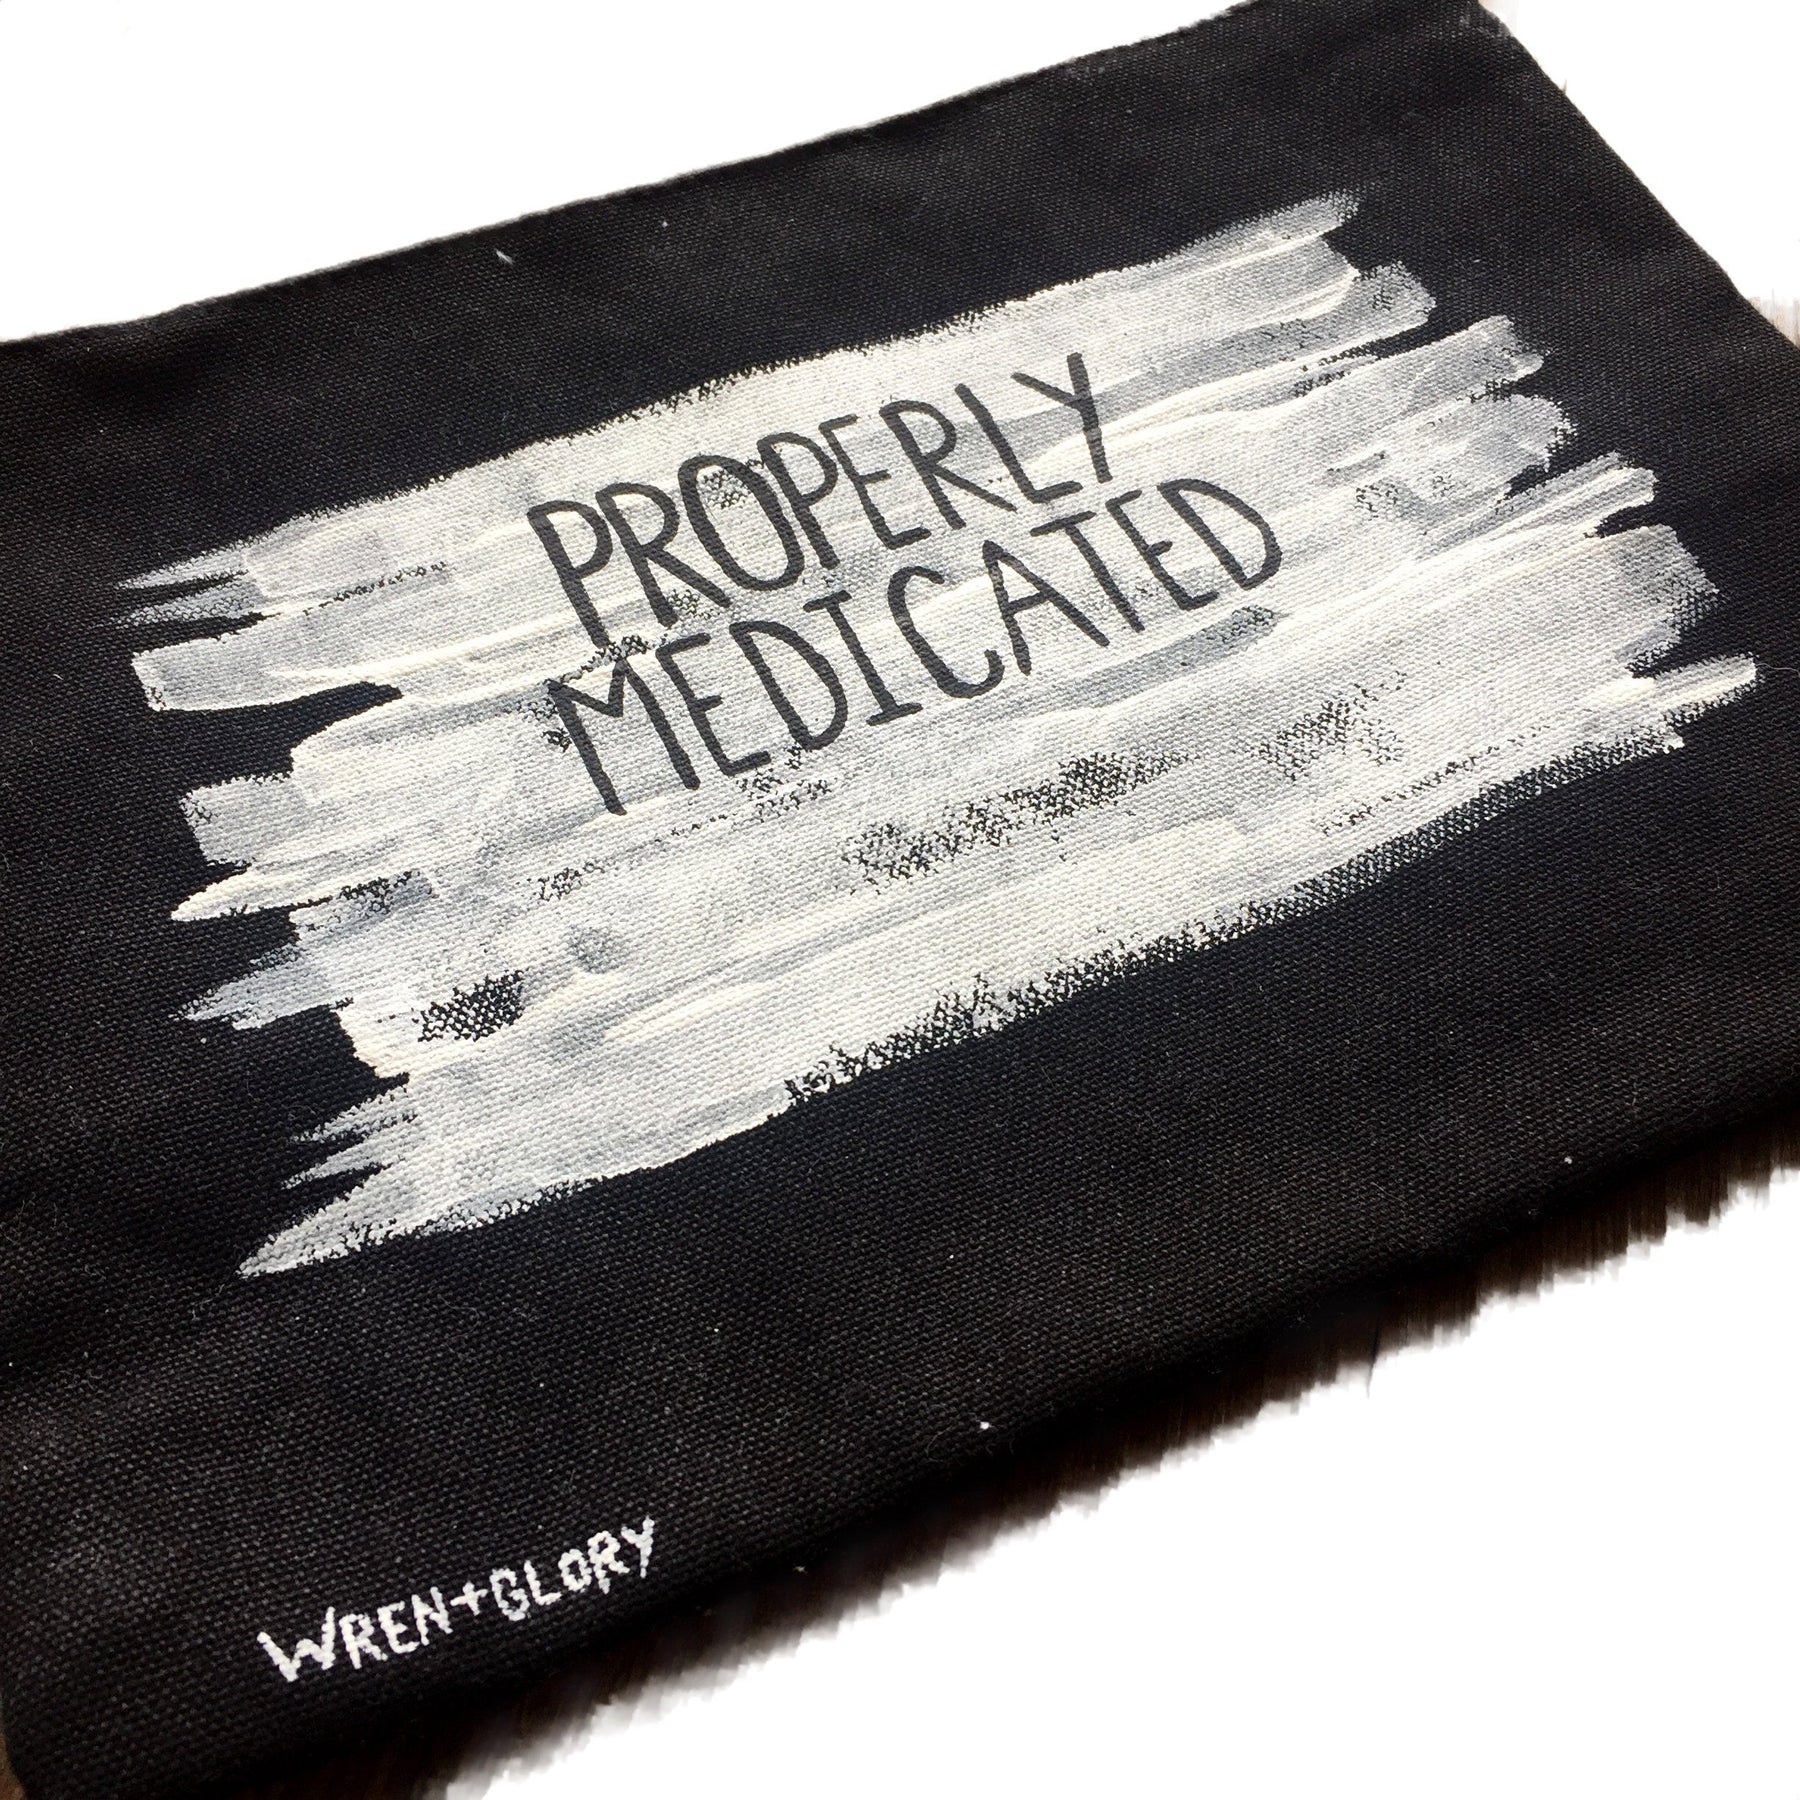 Black canvas zippered pouch Hand painted 'MEDICATED' theme